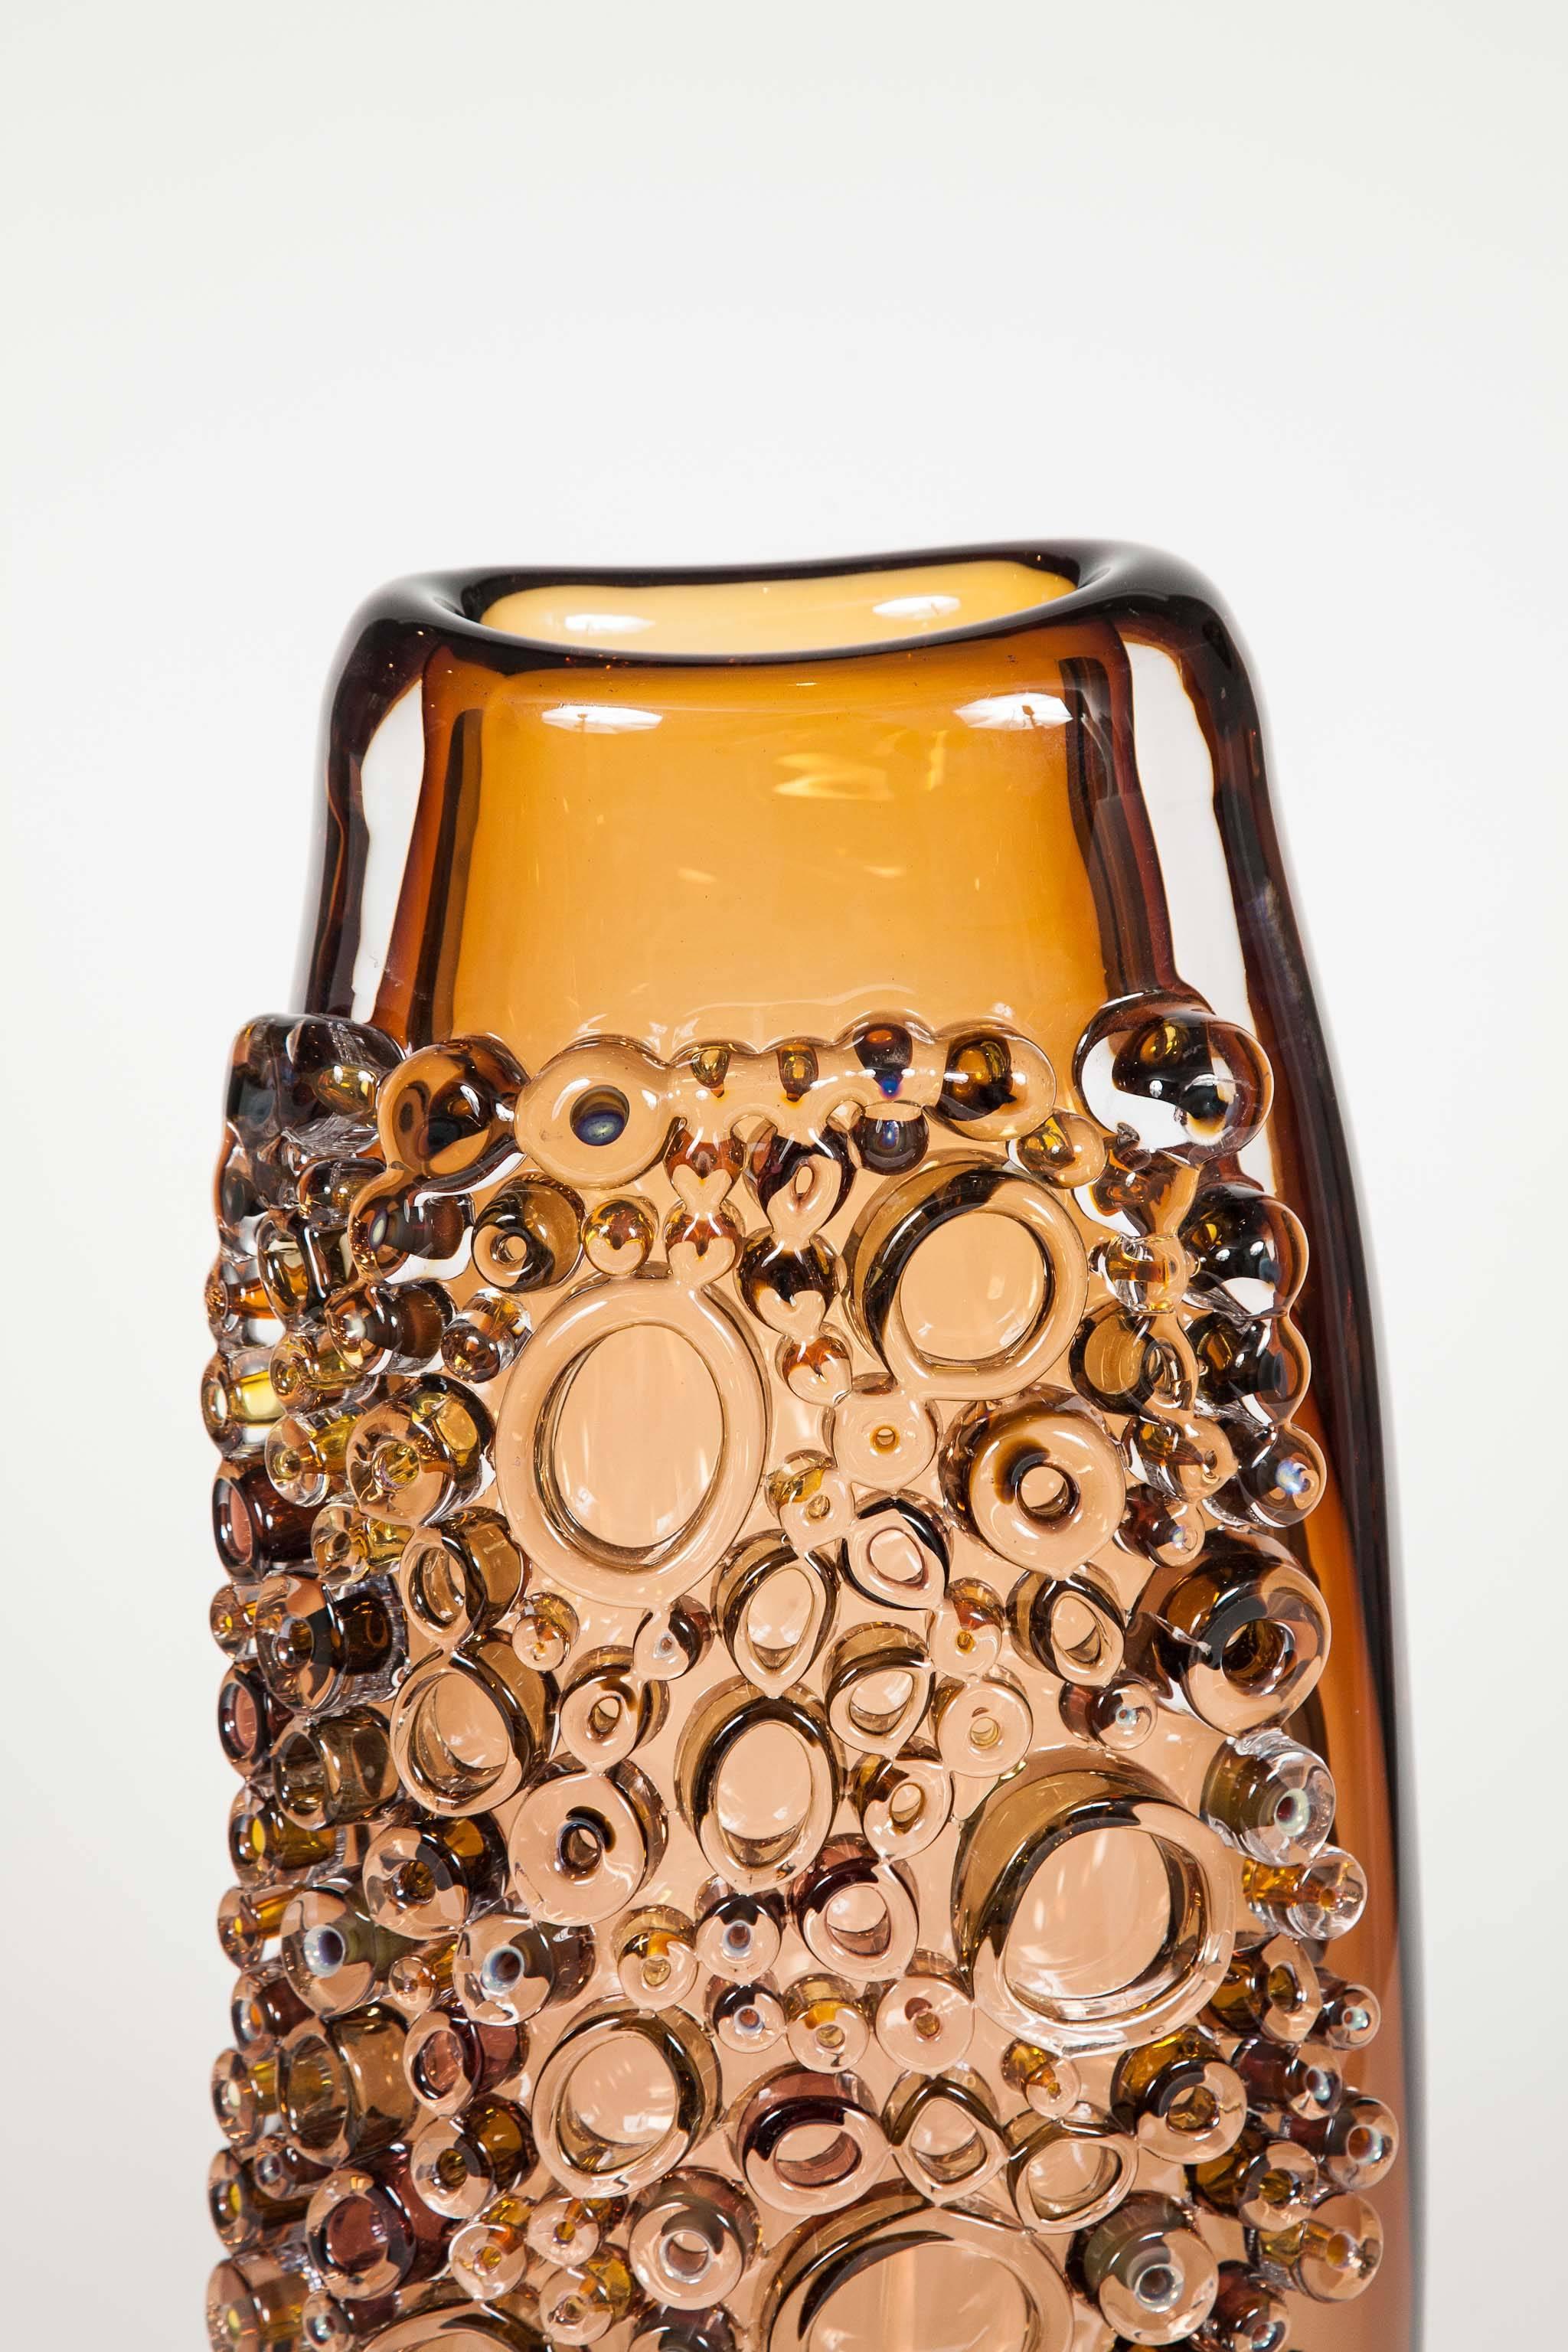 Tube Field Amber, High Shape II is a unique handblown and crafted glass vase & artwork by the German artist, Sabine Lintzen. The initial inner form is free-blown and adorned with various individually shaped murrini, all created in the same sublime